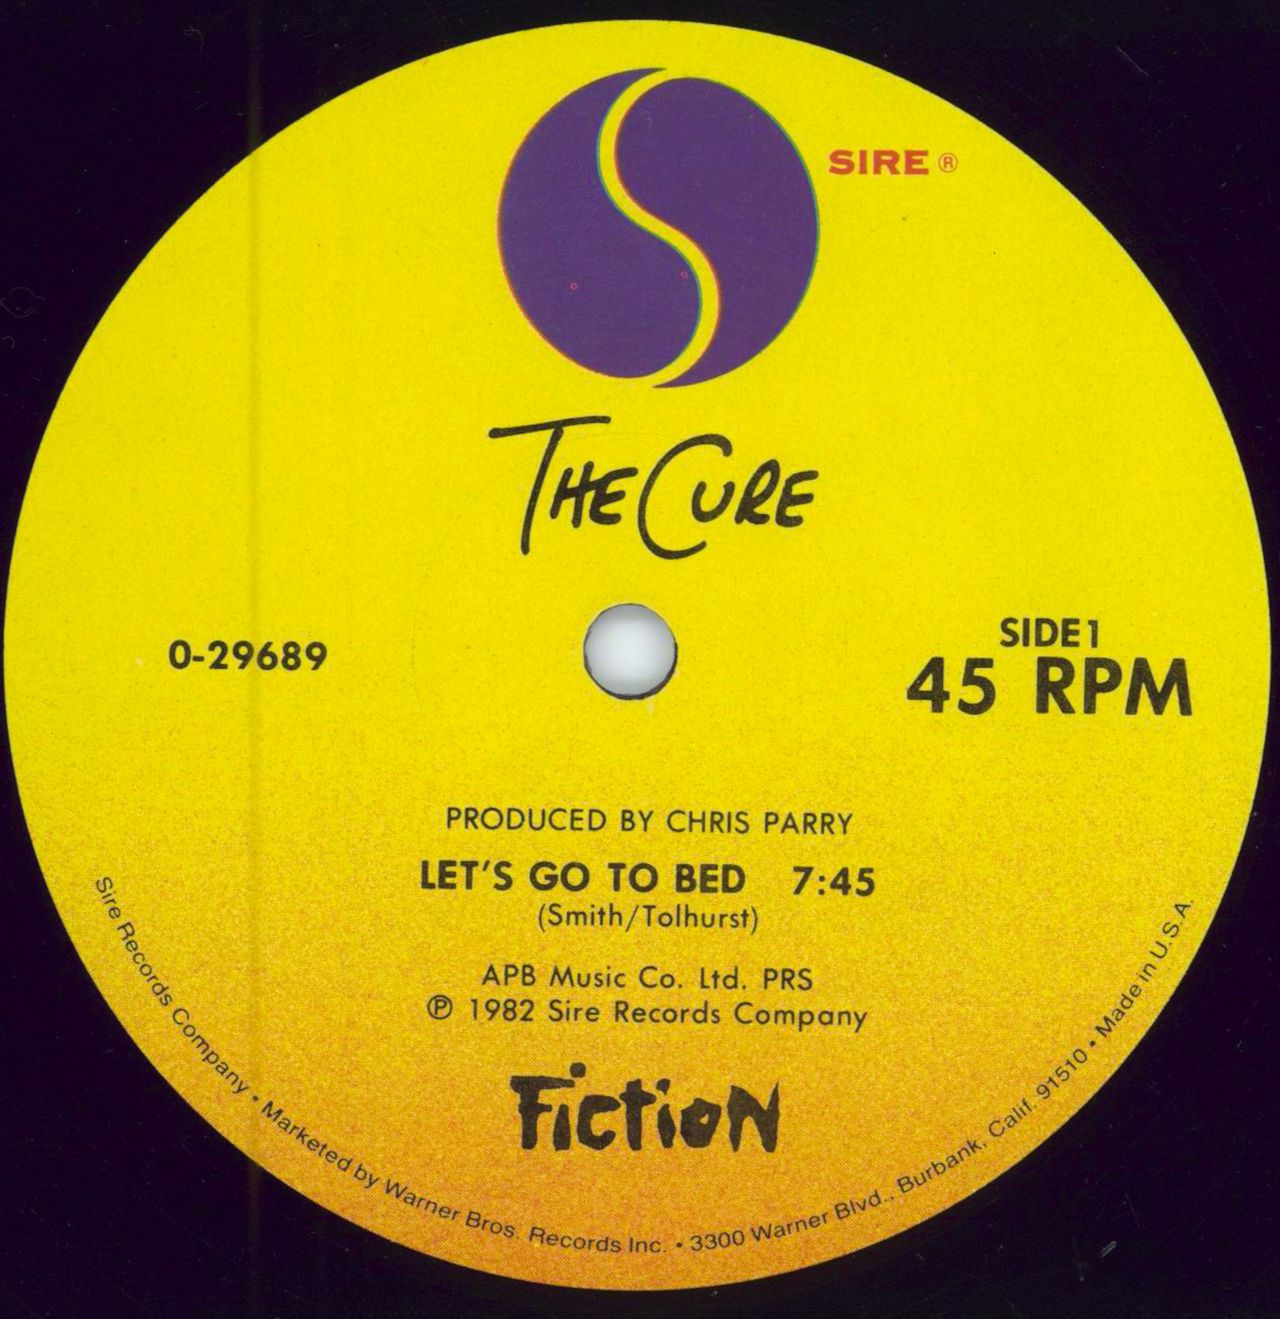 The Cure Let's Go To Bed - EX US 12" vinyl single (12 inch record / Maxi-single) CUR12LE785269